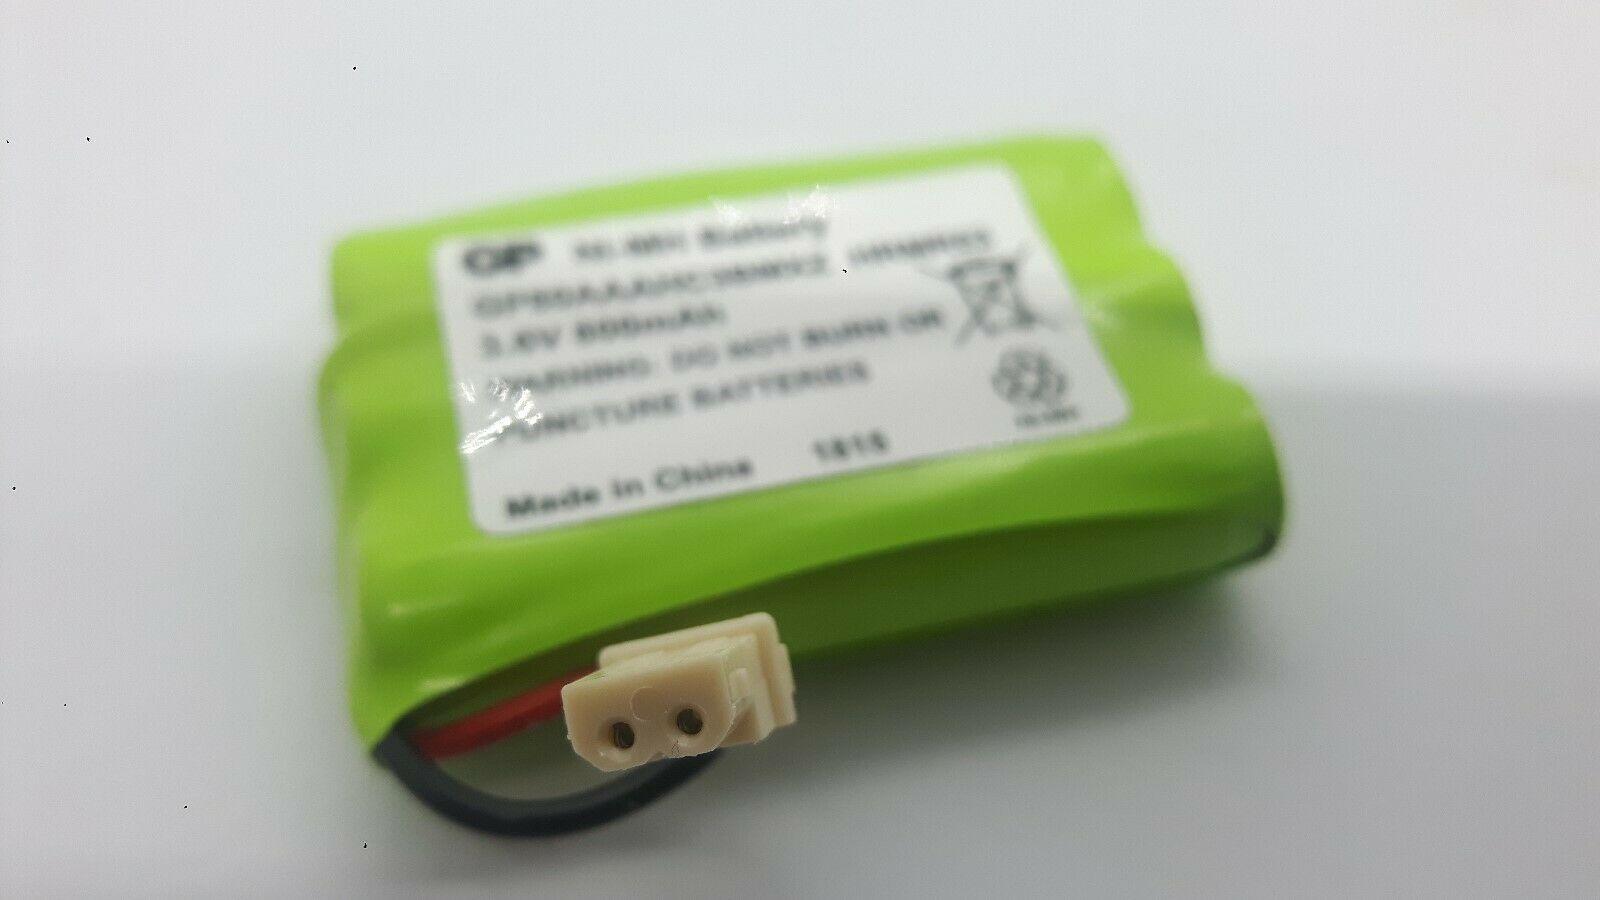 Replacement GP80AAAHC3BMXZ HRMR03 3.6V 800mAh Ni-MH Battery - Office Catch